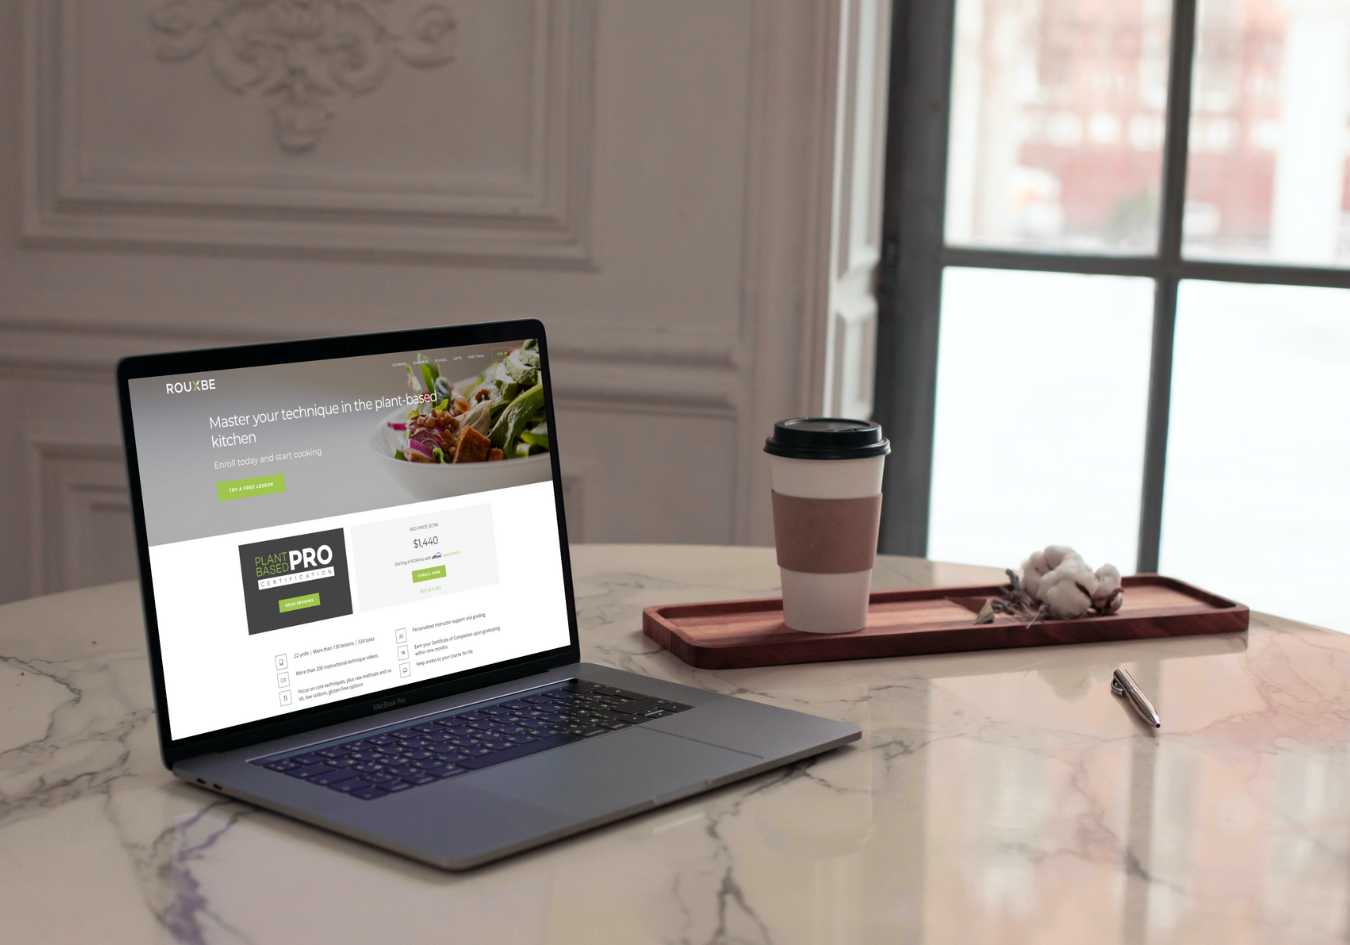 Rouxbe plant based pro course website open on a laptop in a kitchen with a cup of coffee nearby